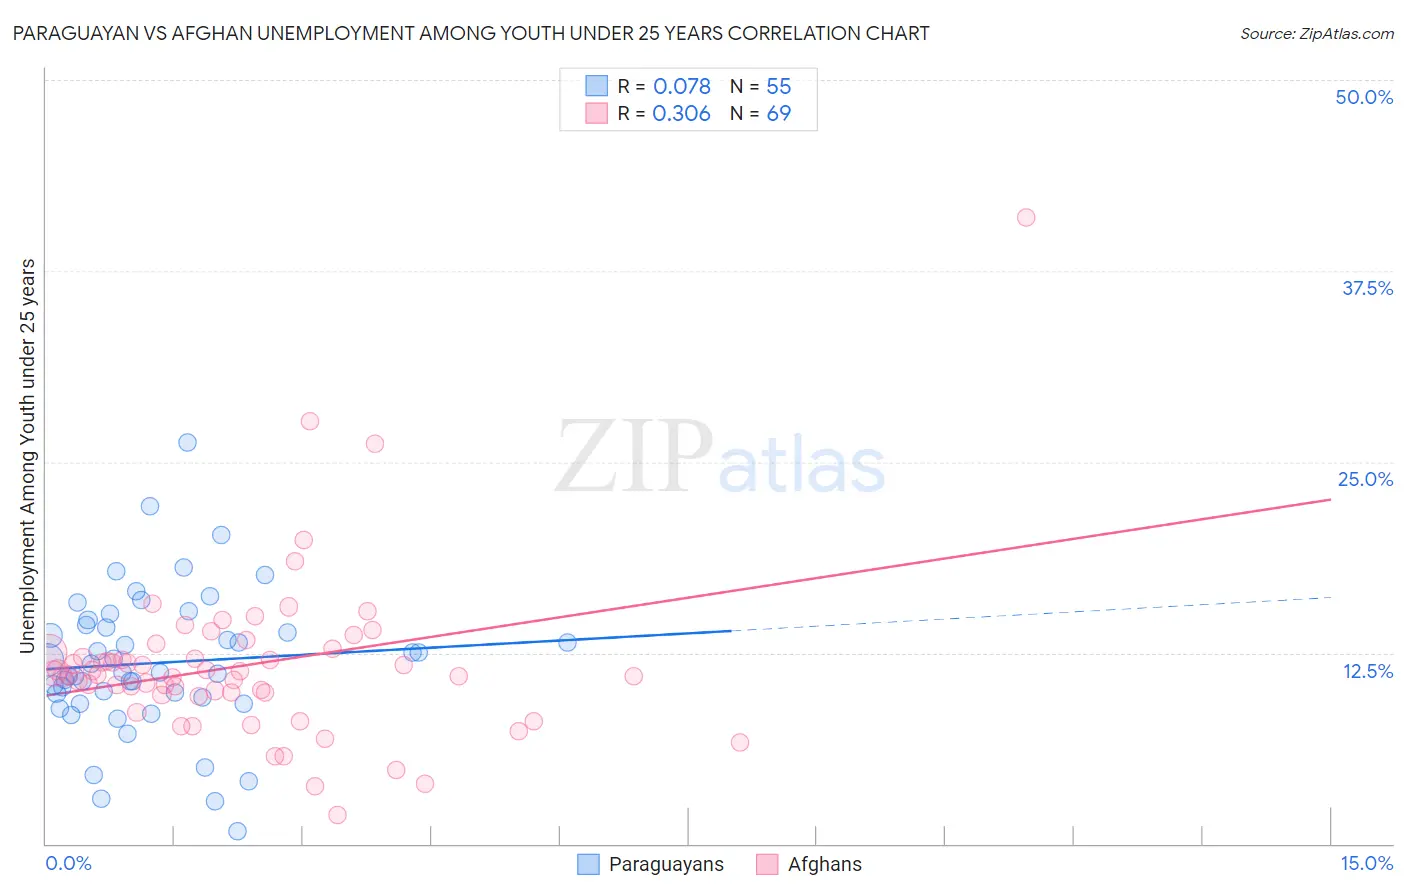 Paraguayan vs Afghan Unemployment Among Youth under 25 years